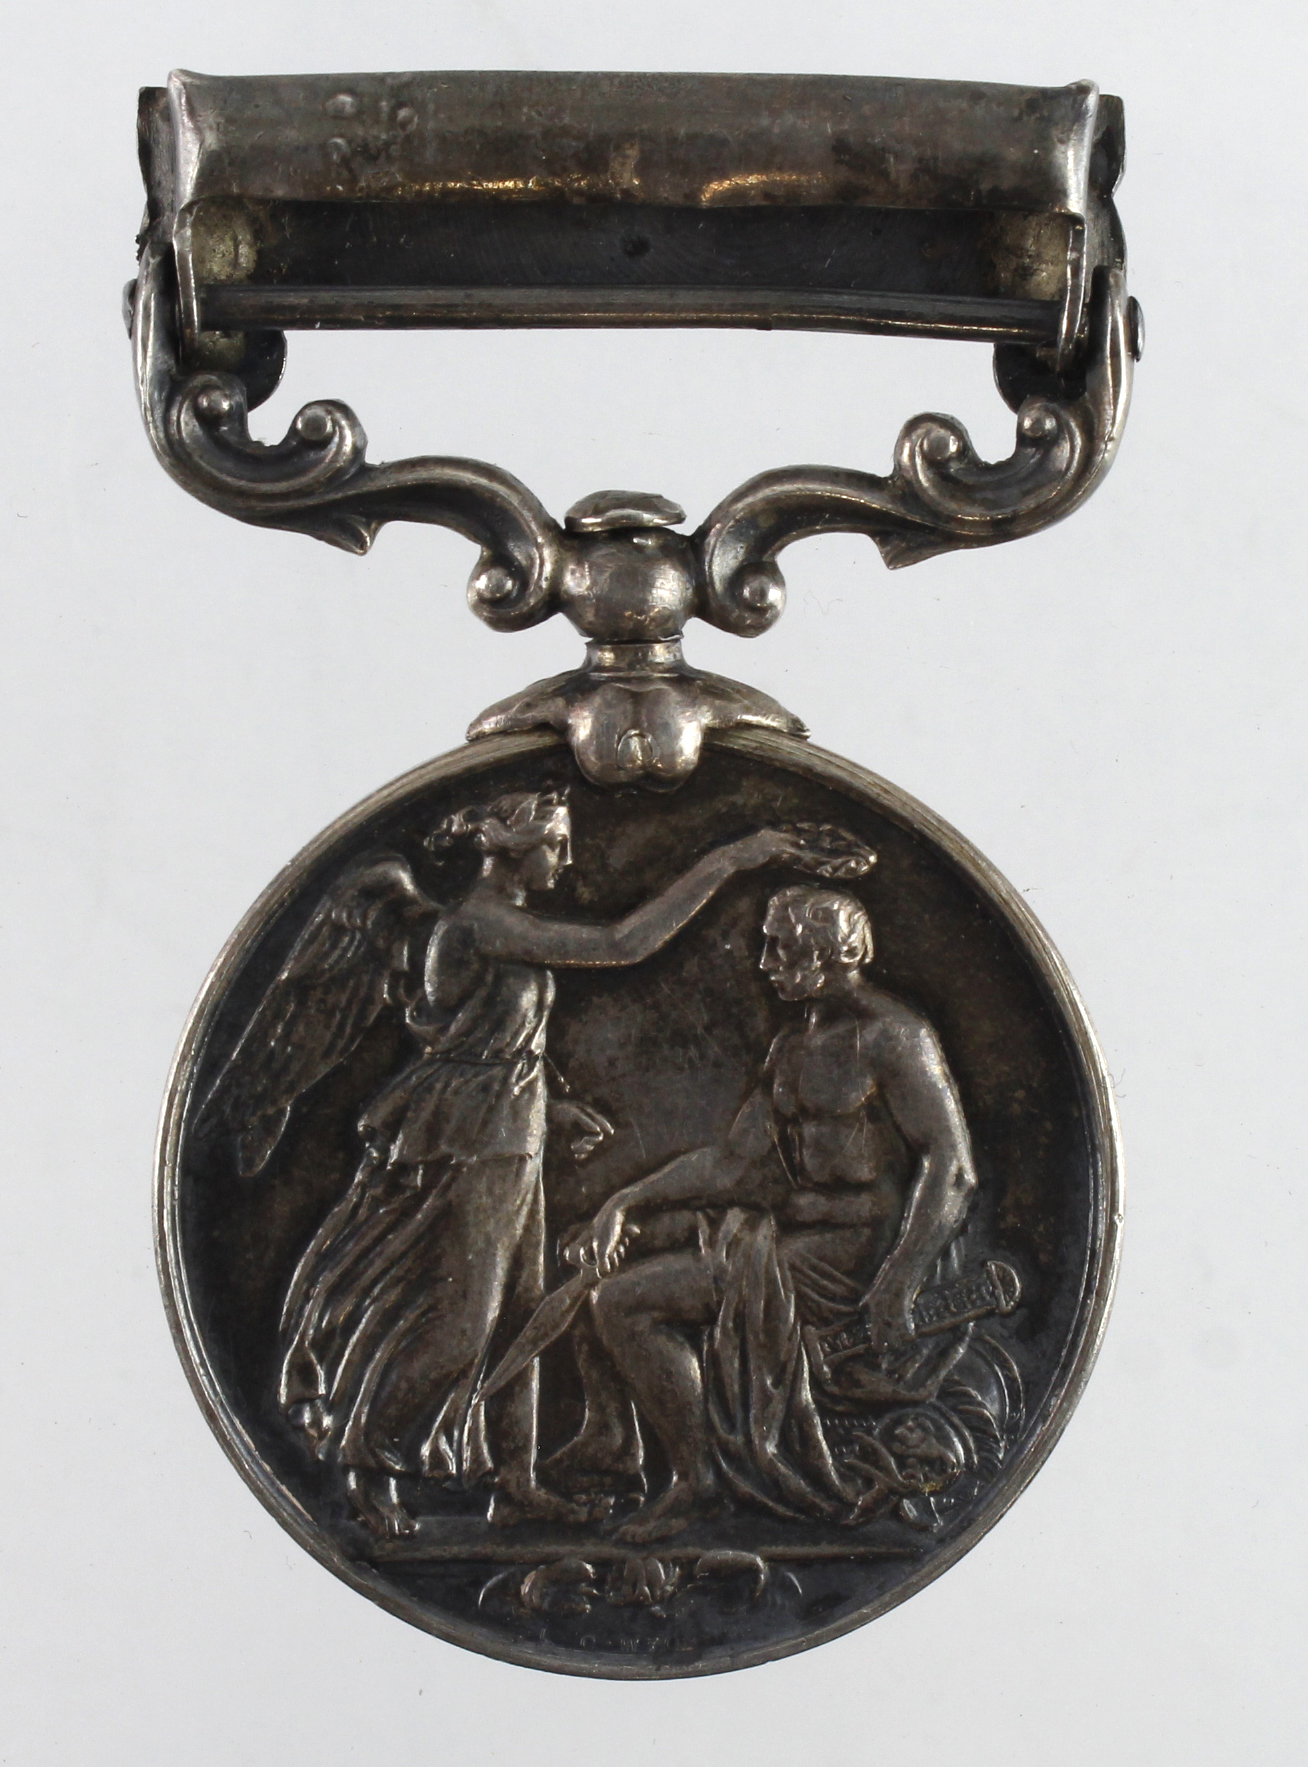 IGS 1854 with Burma 1887-89 clasp (1723 Pte J Moore 2d Bn Norfolk Regt). Confirmed to roll - Bild 2 aus 2